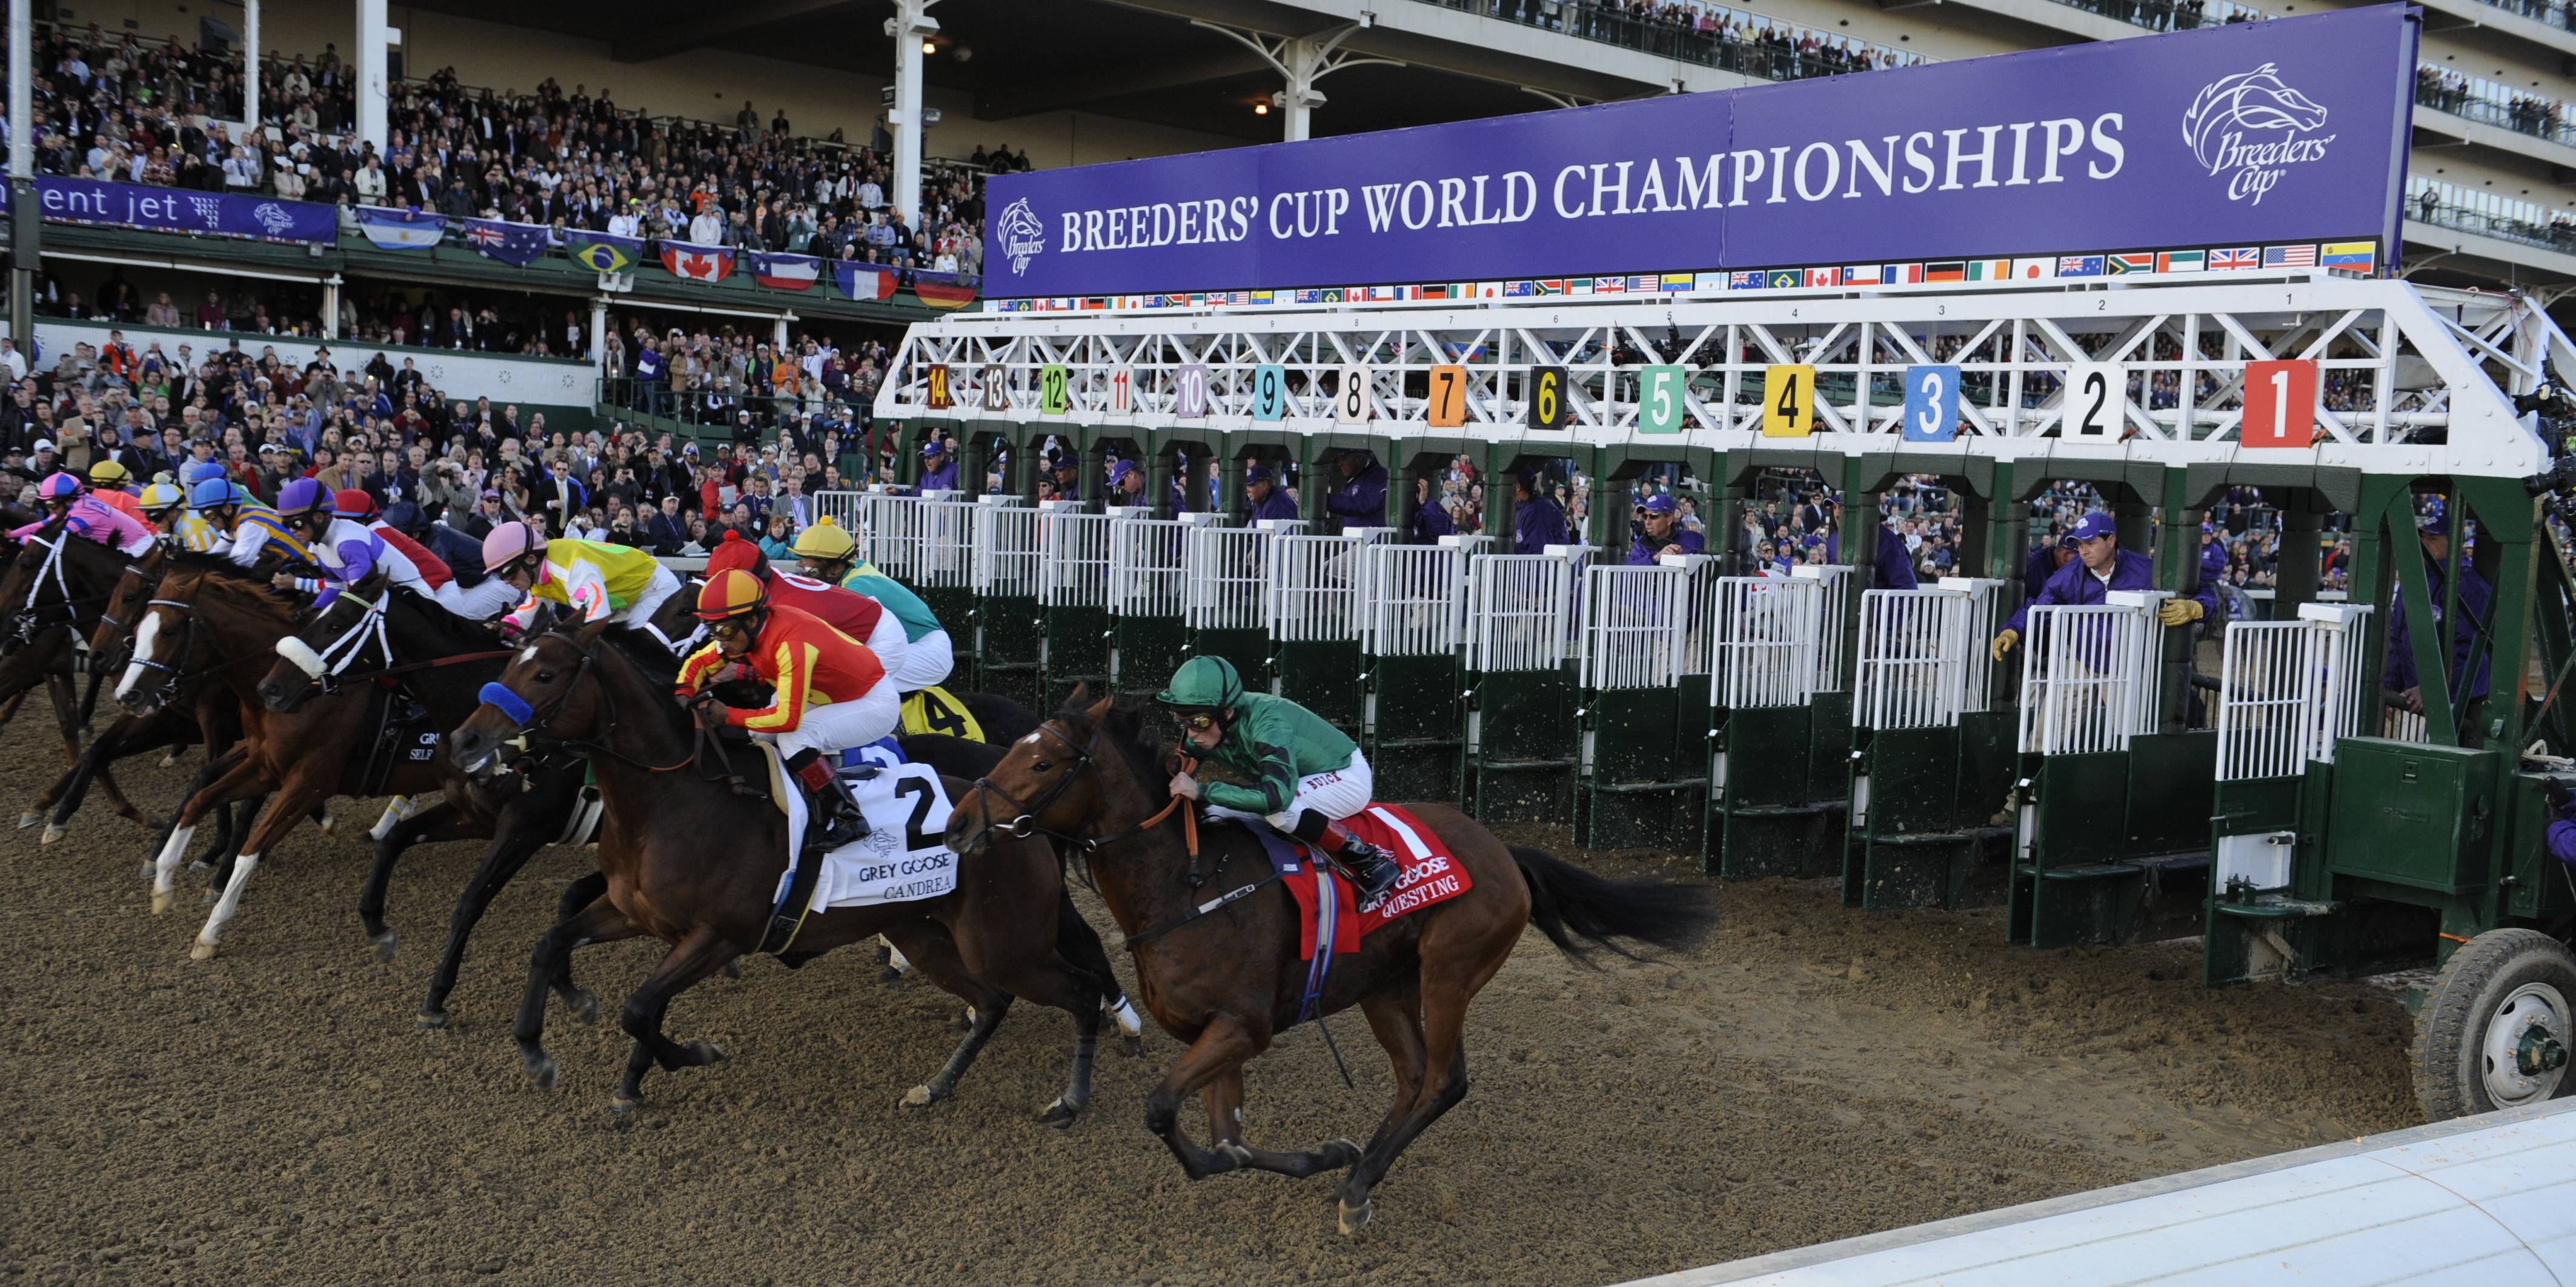 It’s Post Time by Jon White: Breeders’ Cup Recap